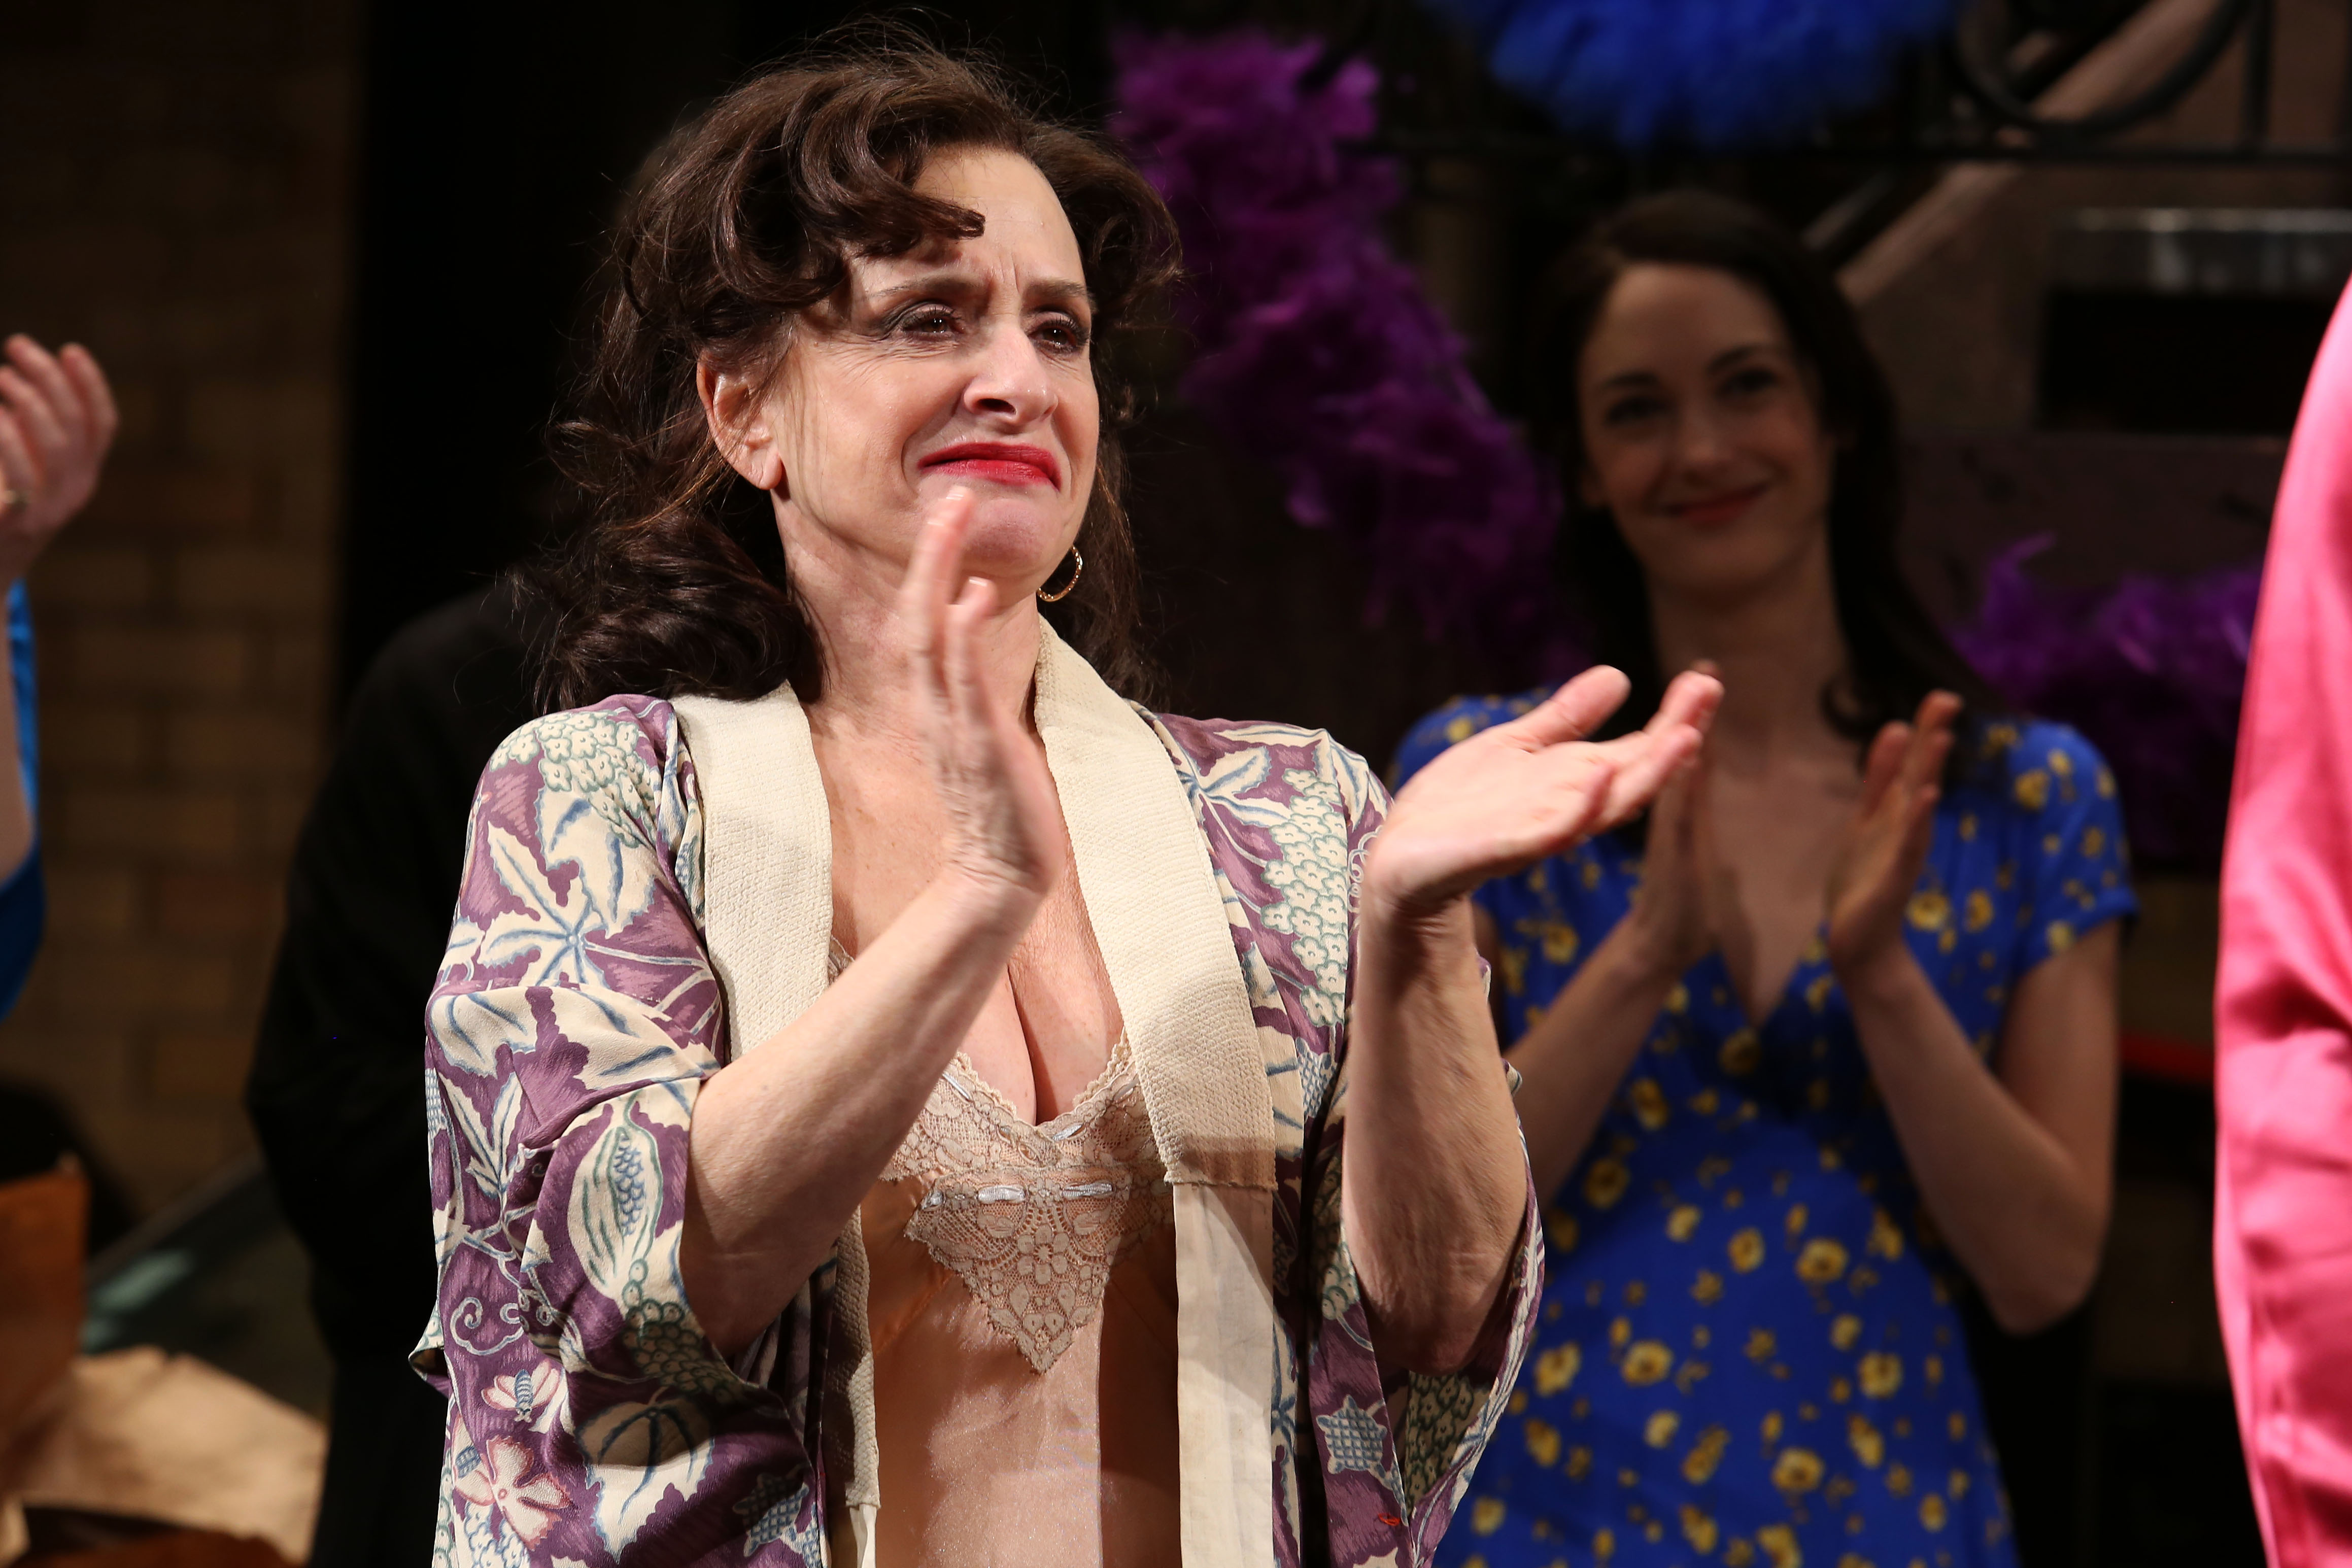 Patti LuPone appears on stage for "The Rose Tattoo" curtain call in Aprilon Monday, April 27, 2015, in New York. Photo by Greg Allen/Invision/AP.